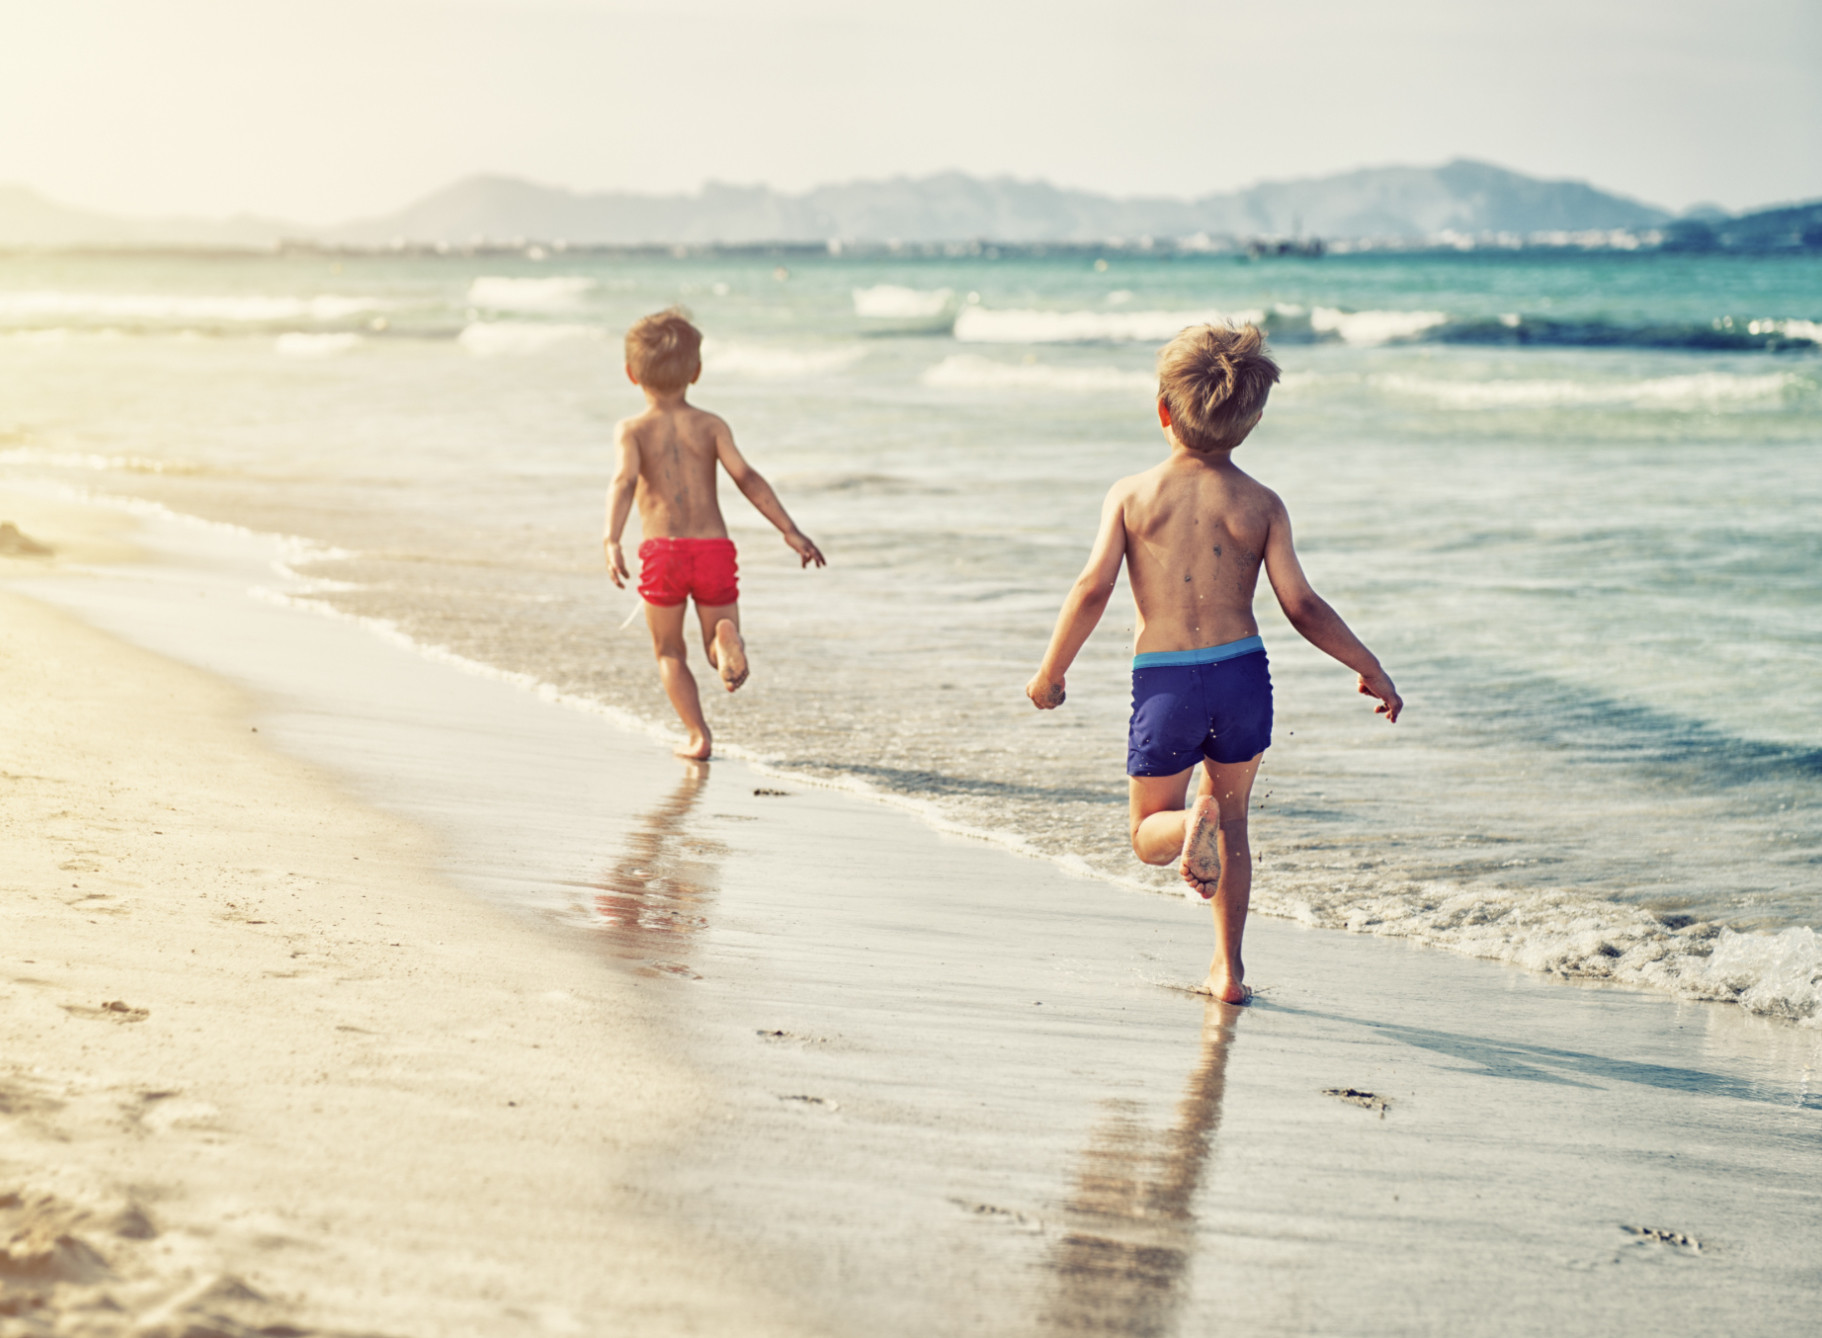 Parents arrested for letting kids play on the beach alone